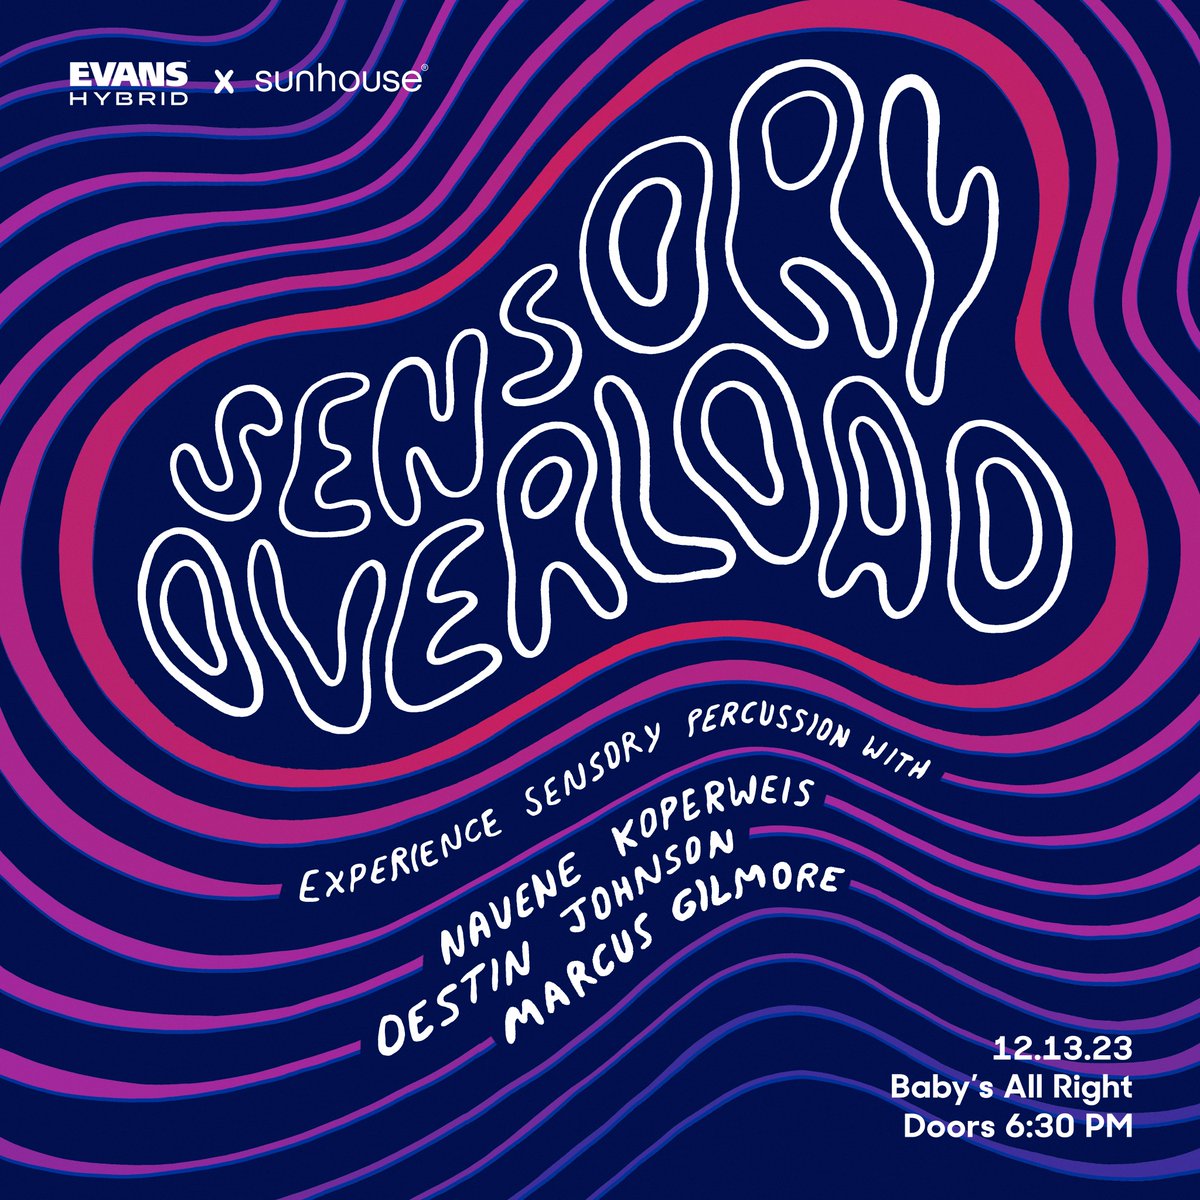 Extremely excited to announce Sensory Overload, a live Sensory Percussion event! 🥁🕹💻 With performances from @drummerslams, @navenek, and @dbxsupreme, it's sure to be an amazing night of Sensory Percussion-centric music! @BabysAllRight 🎟️ link: seetickets.us/event/dadarrio…